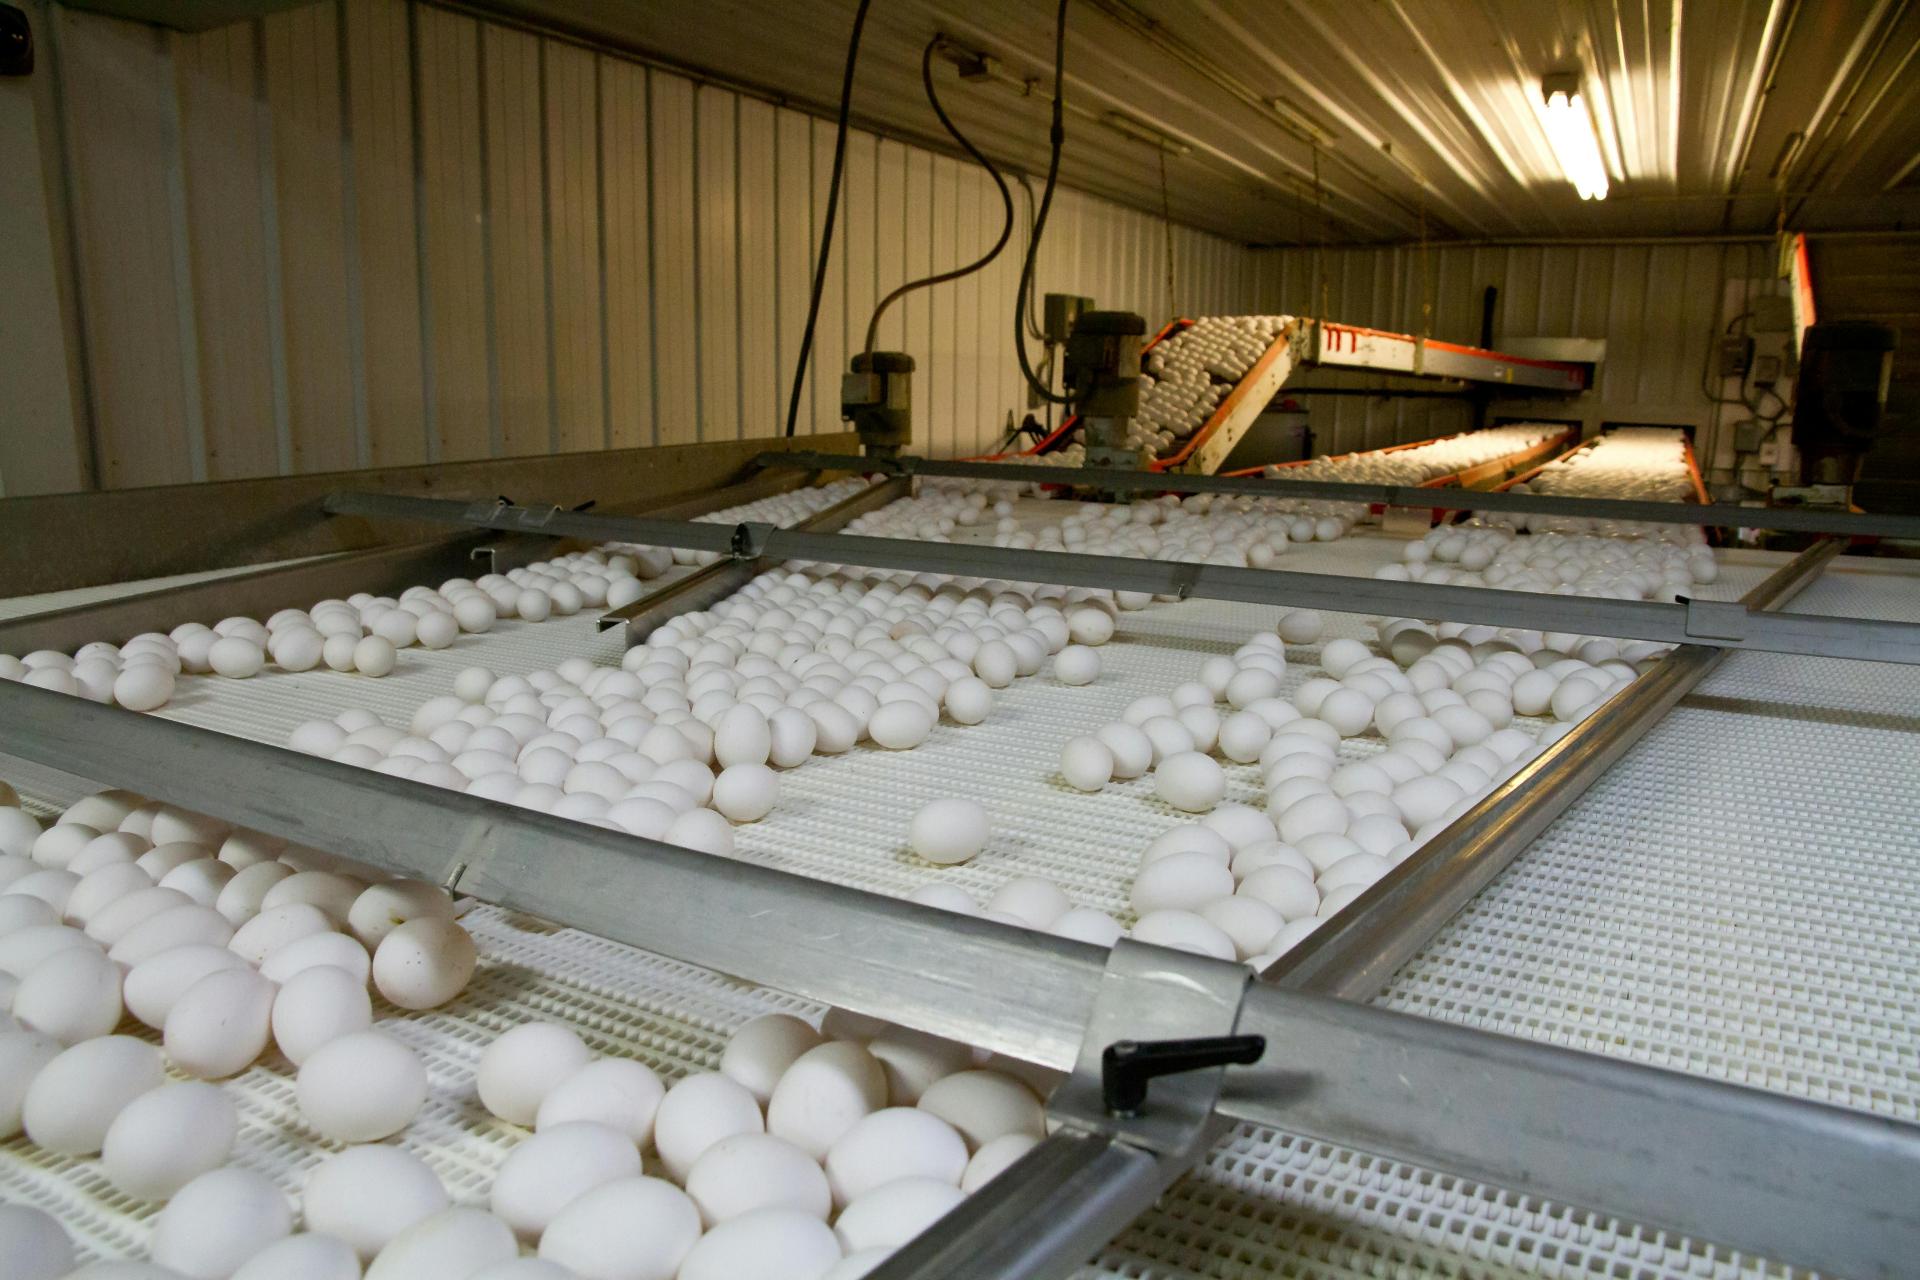 eggs being sorted